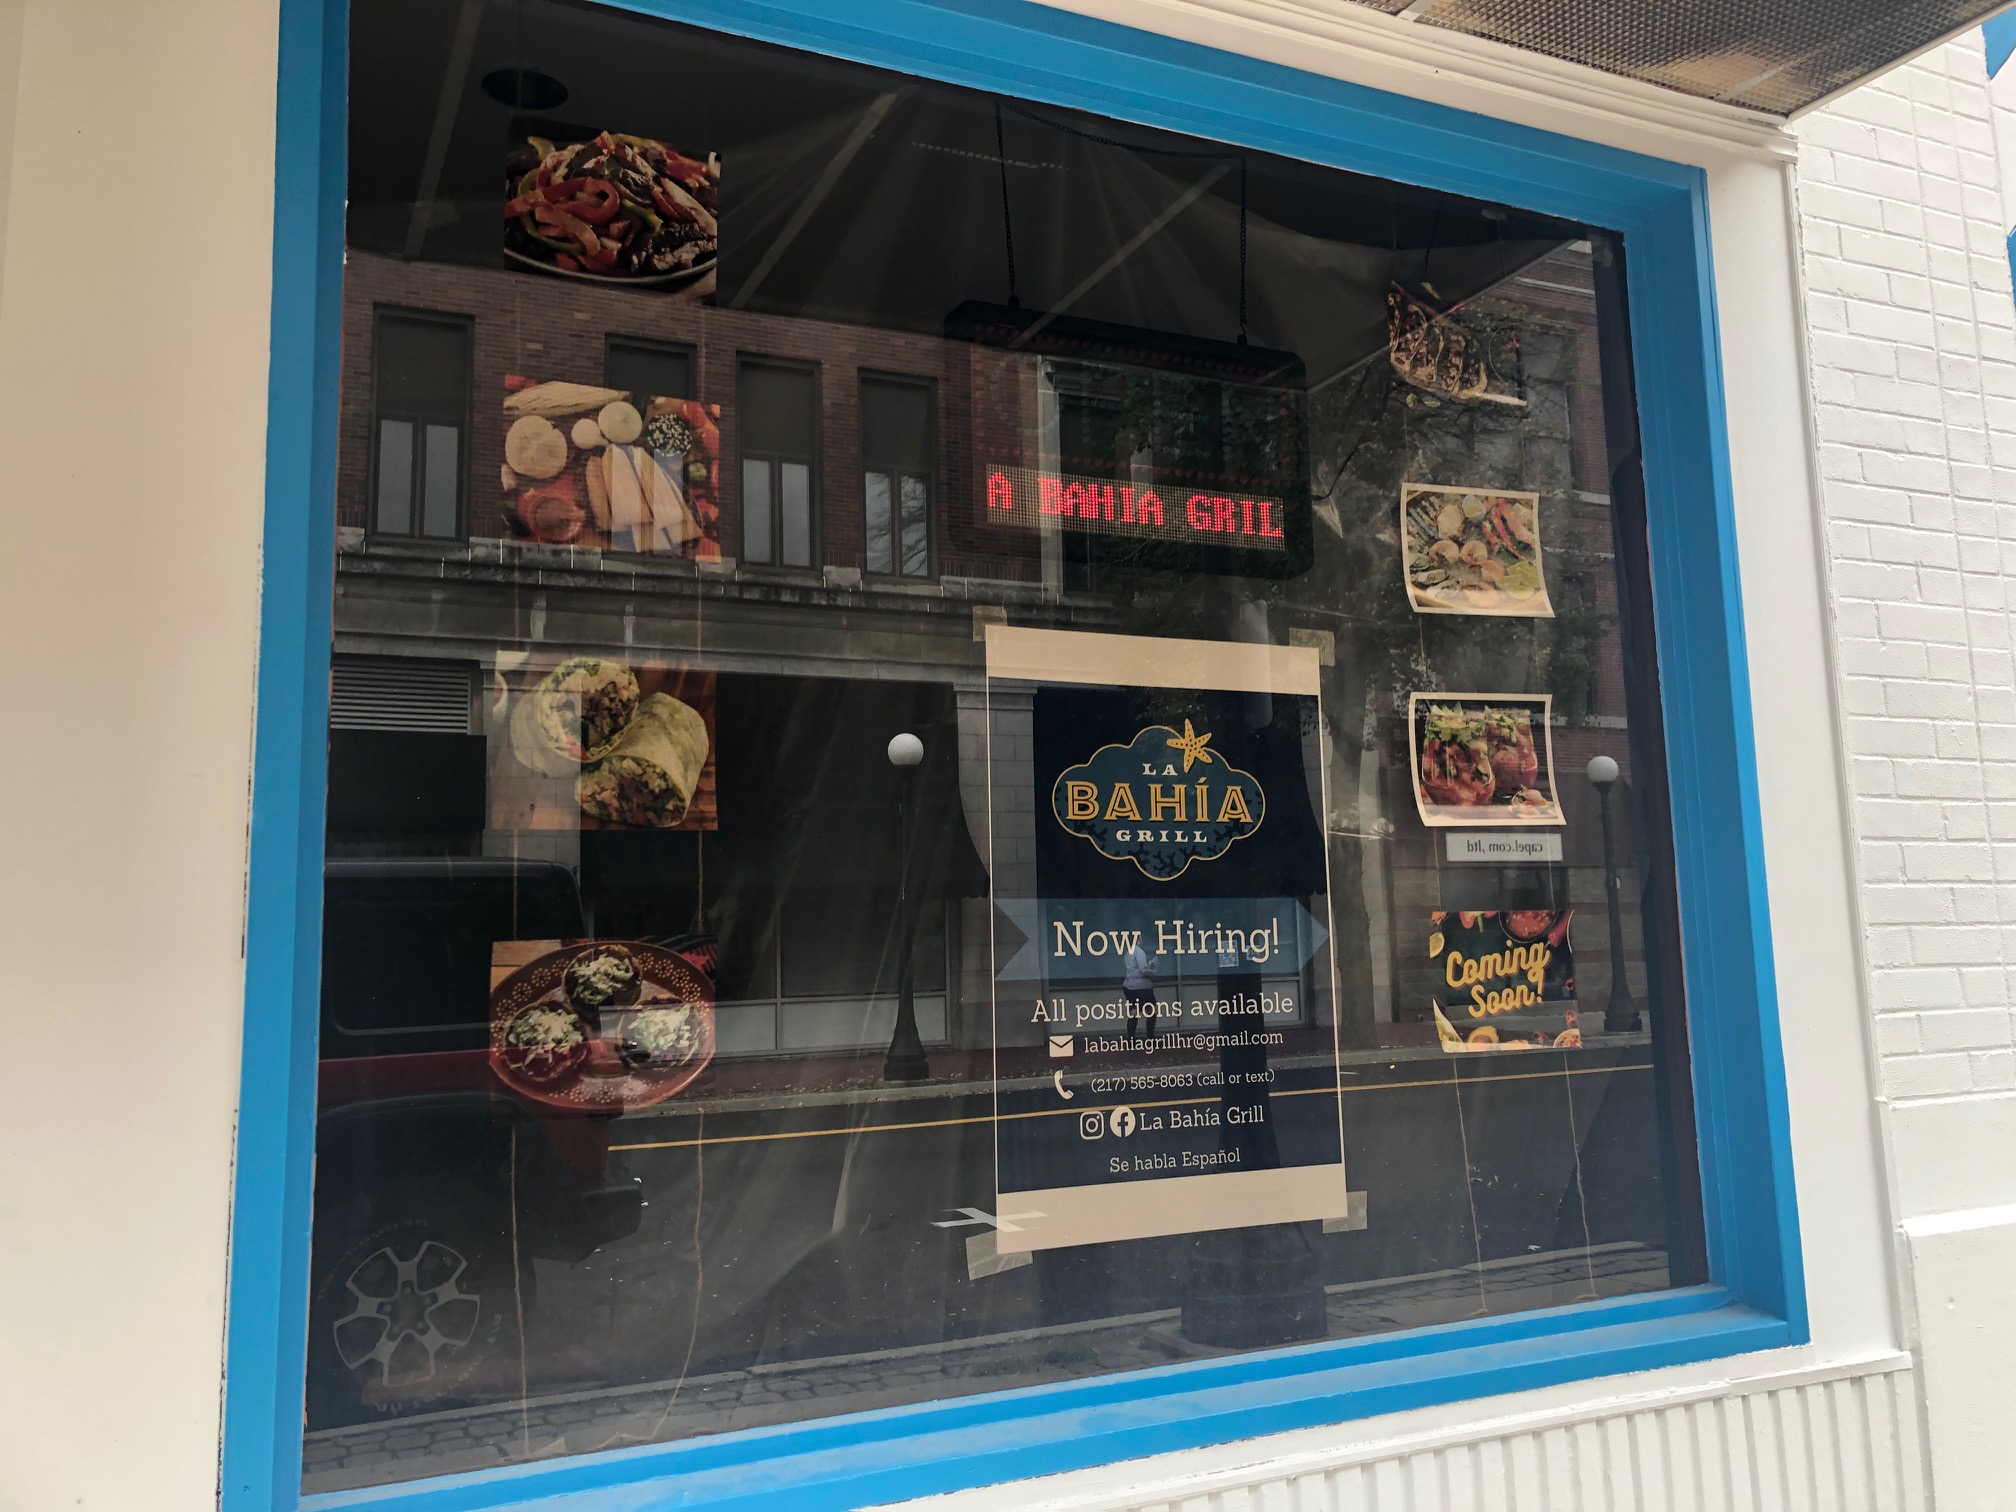 On brick painted white, there is a window with photos of food taped to the inside with a sign reading: La Bahia Grill Now Hiring. Photo by Alyssa Buckley.